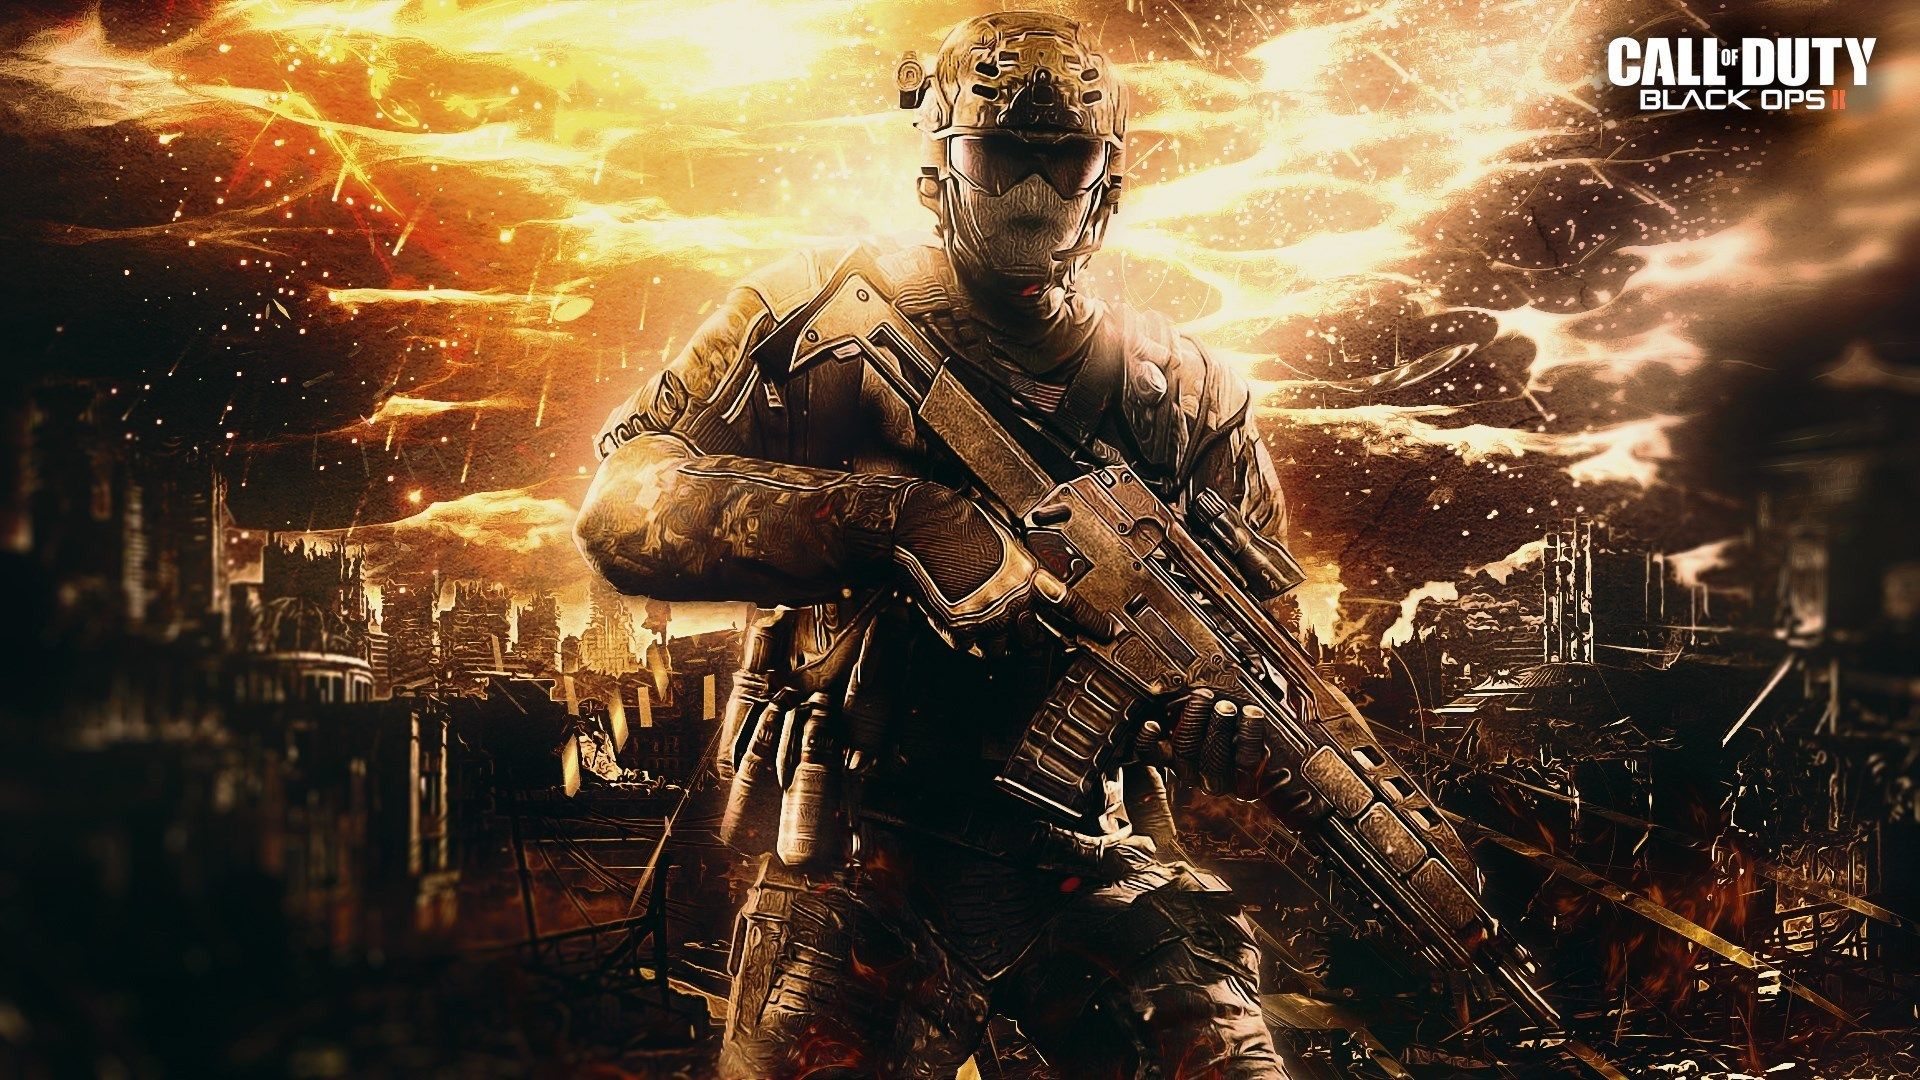 free download picture of call of duty black ops ii. Call of duty black, Black ops, Call of duty